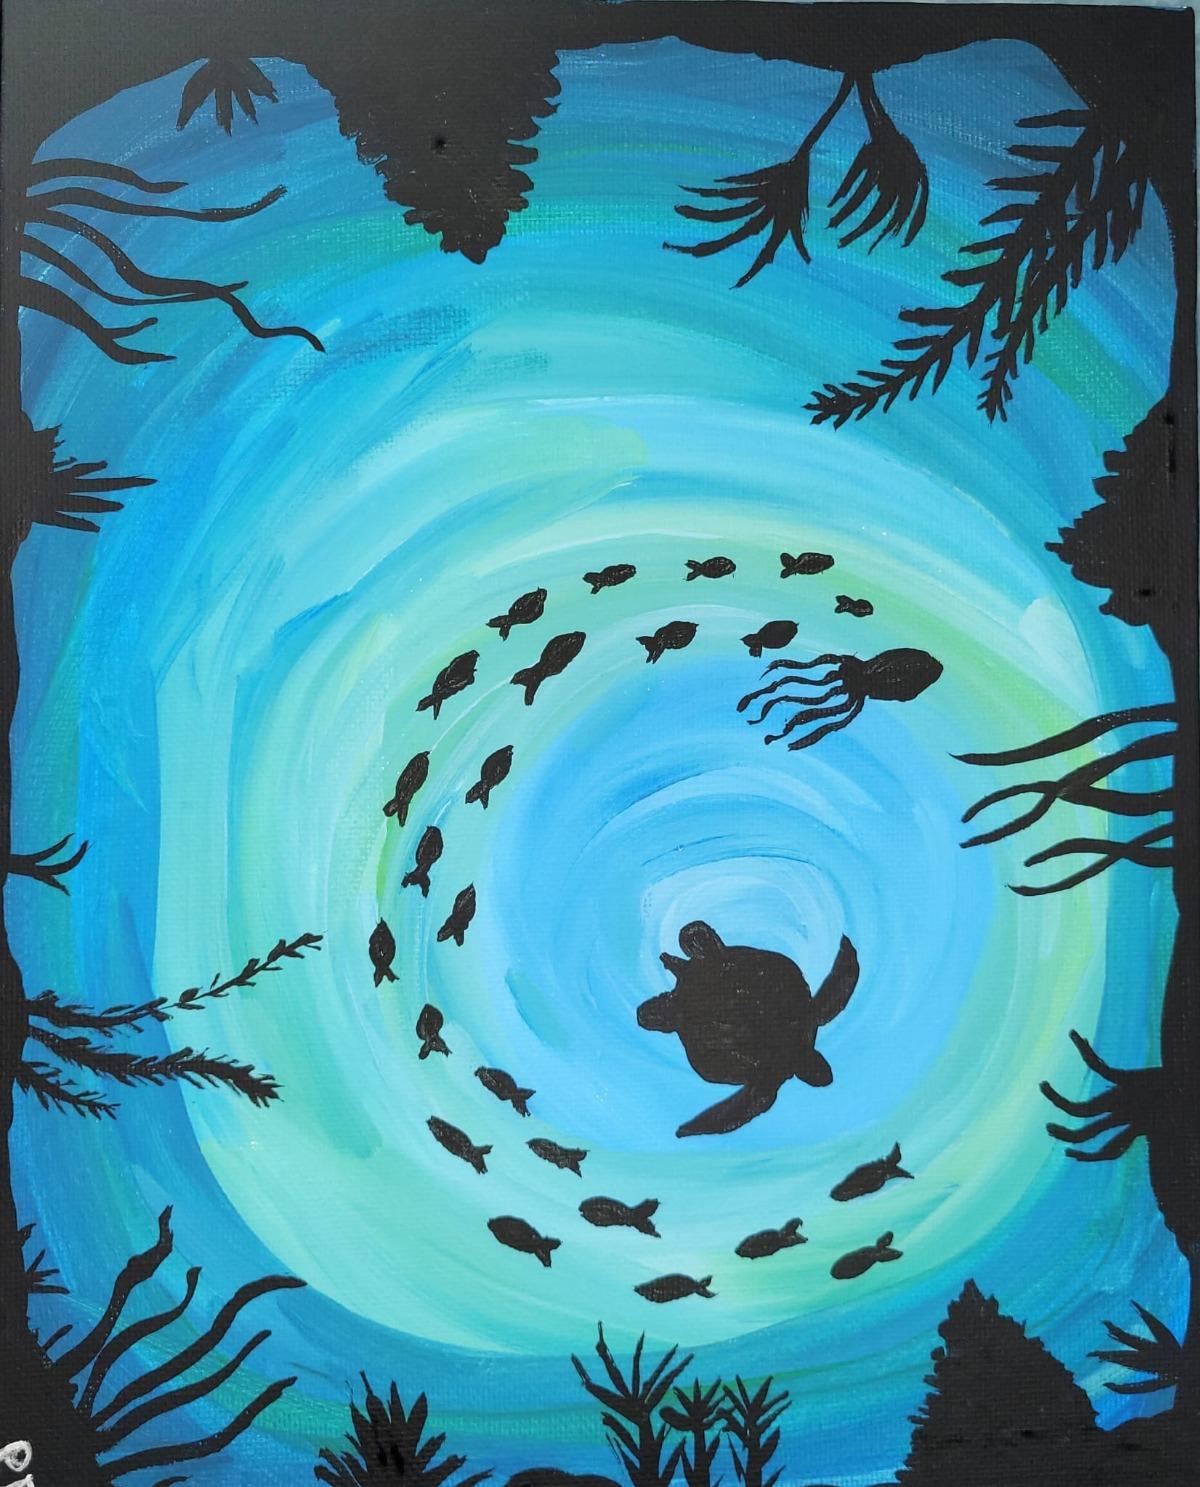 Painting of a turtle, octopus and school of fish swimming